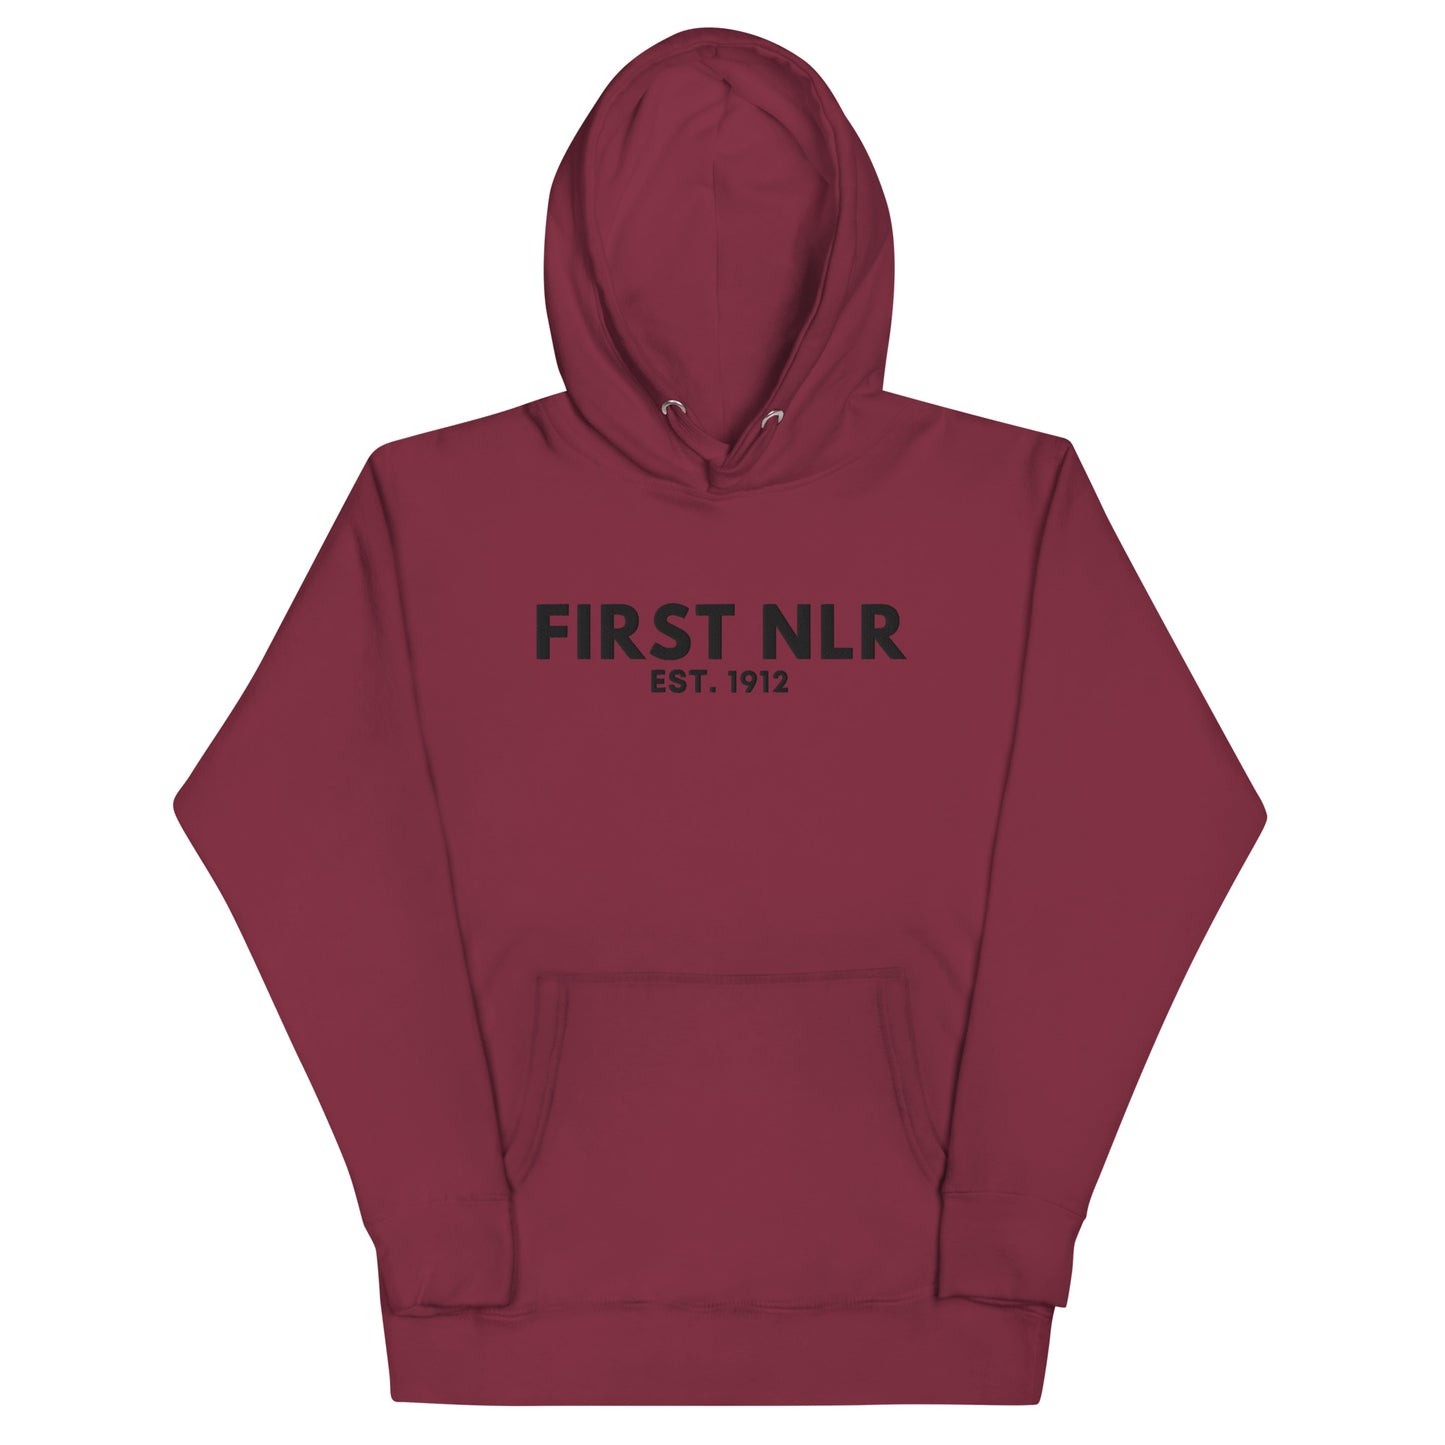 First NLR Embroidered (Black) Hoodie